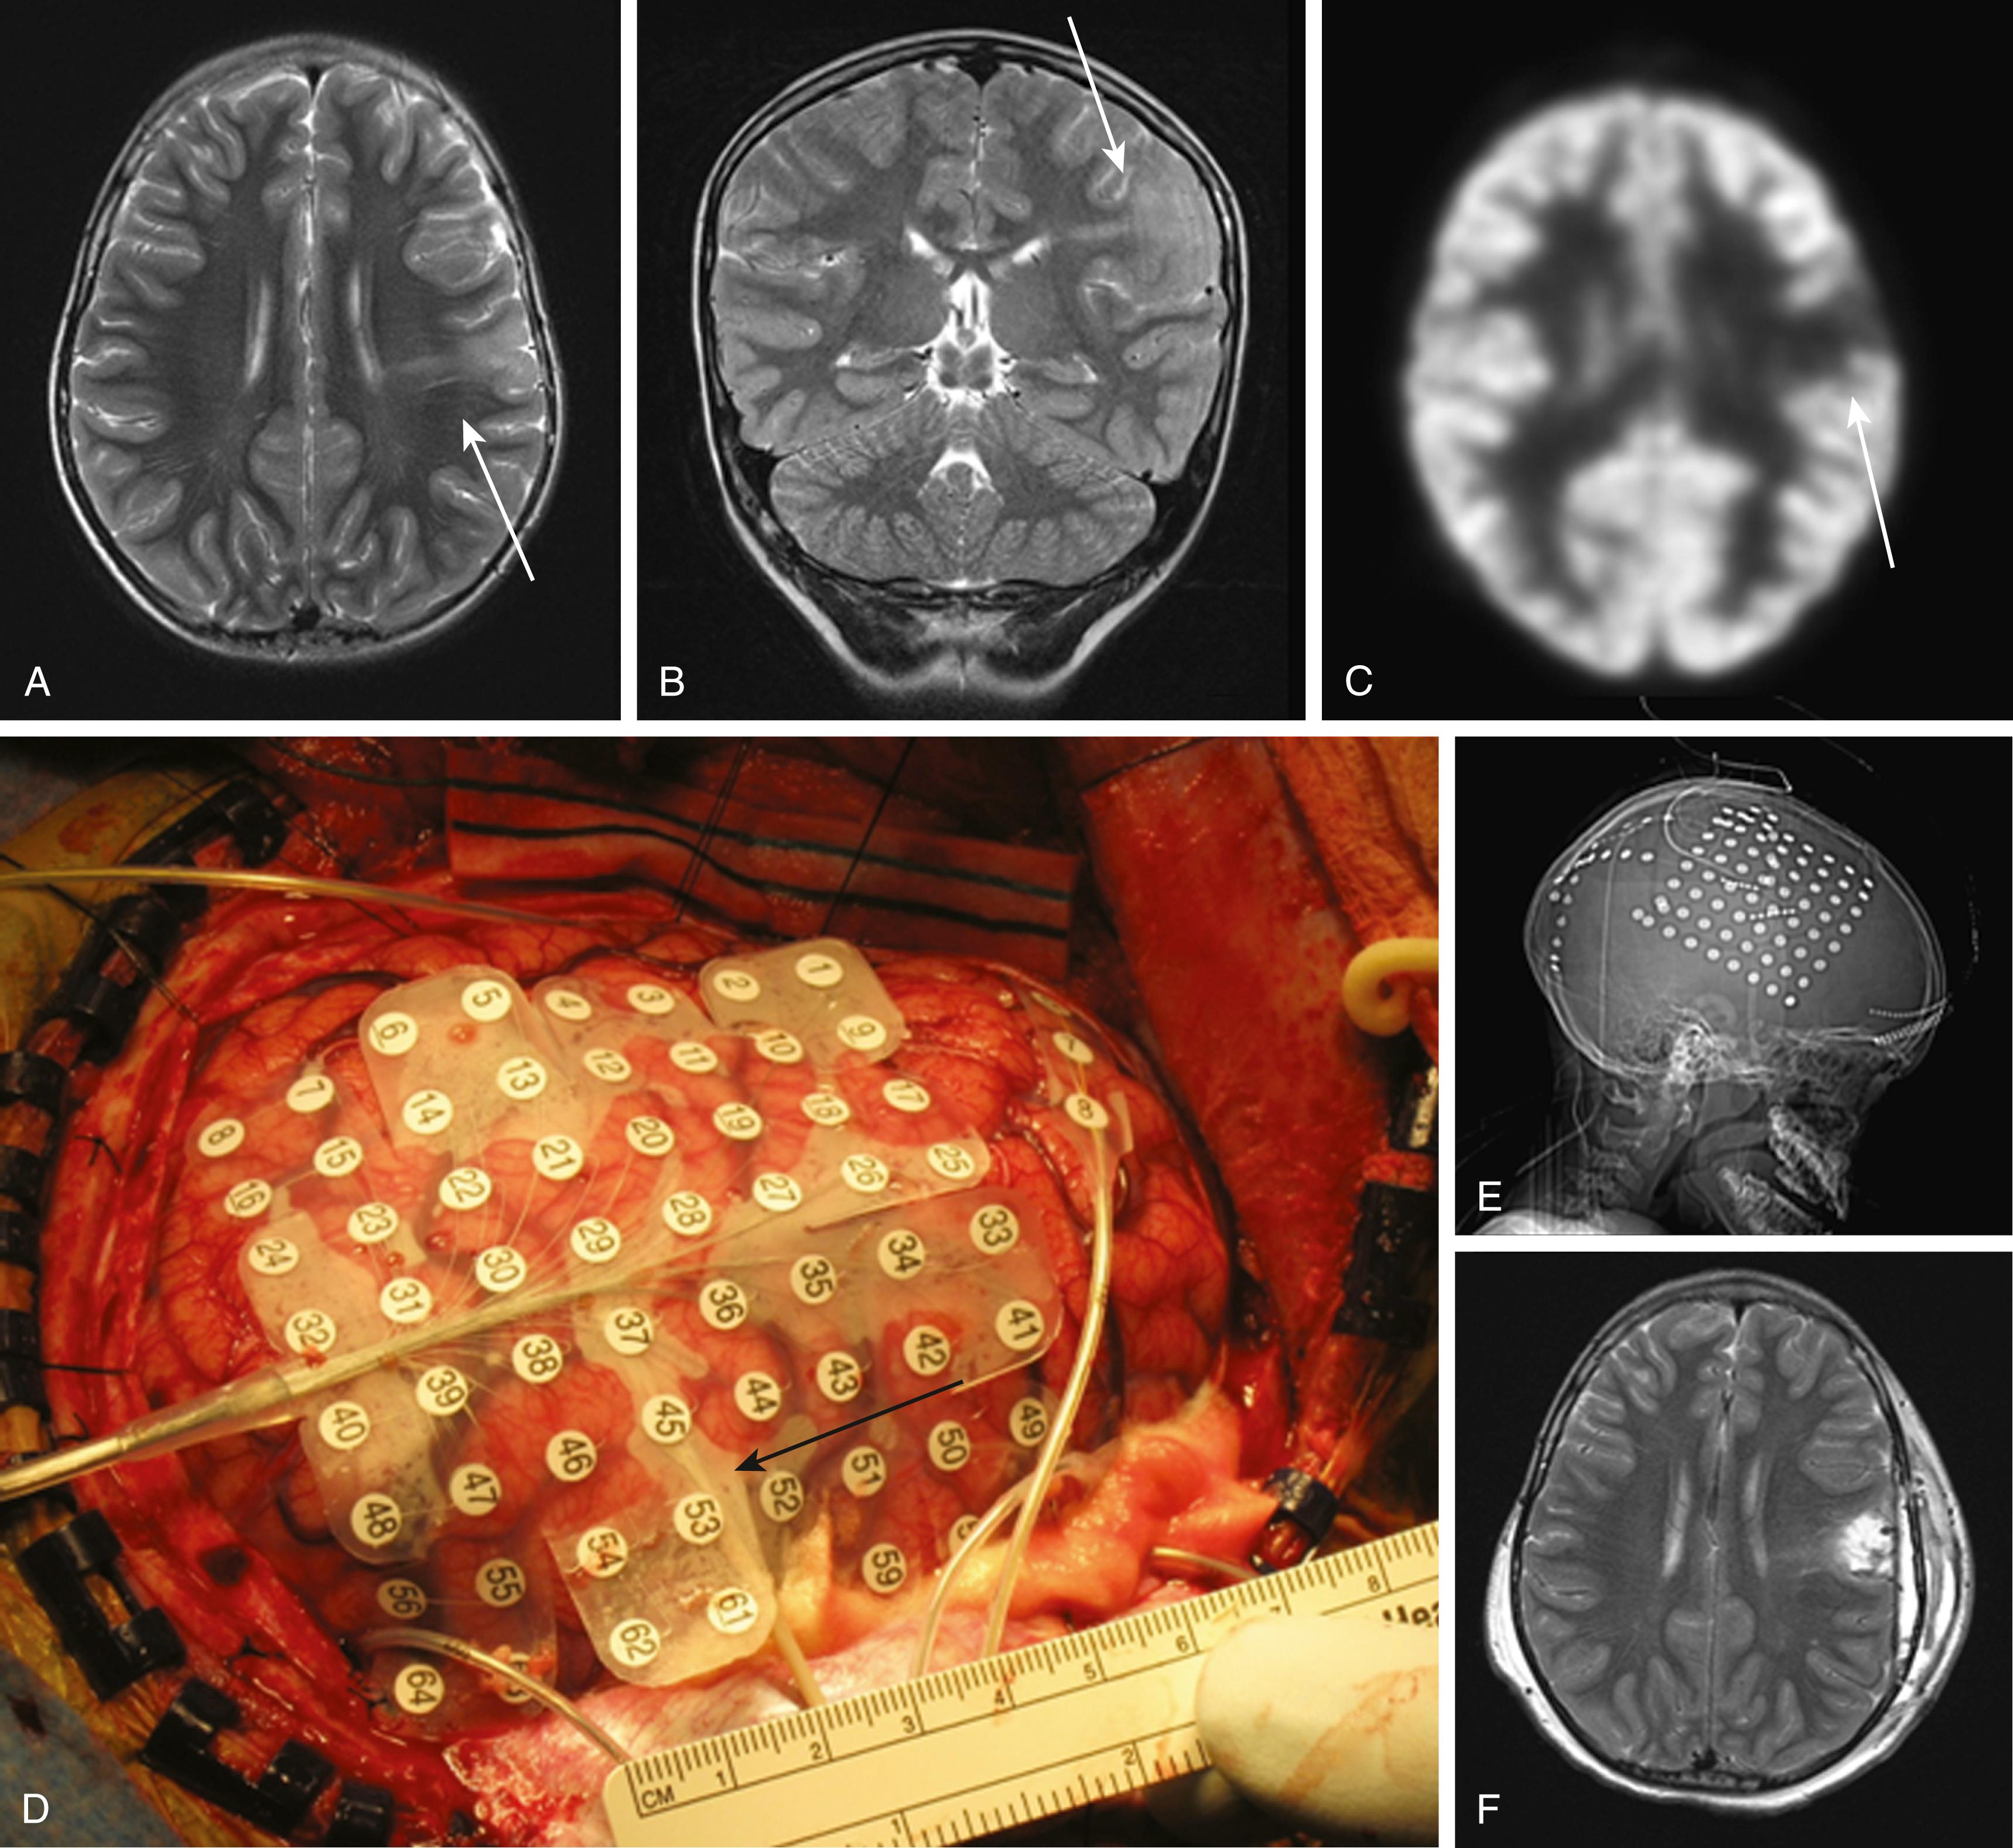 FIGURE 71.1, A 9-year-old boy with intractable epilepsy due to focal cortical dysplasia. Preoperative axial (A) and coronal (B) T2 magnetic resonance imaging (MRI) showed thickened cortex in the parietal lobe with a tail of dysplasia extending to the ventricle (arrows) . (C) Positron emission tomography showed corresponding hypometabolism (arrow) in dysplastic focus. (D) Grids, strips, and depth electrodes were implanted to more precisely localize seizure onset and map motor and language functions. Arrow shows insertion site of depth electrode under grid. (E) X-ray of final electrode arrangement. All recorded seizures began superficially in the dysplastic area. Language and motor function were sufficiently removed to allow for a focused, superficial resection of the dysplasia as shown by the postoperative MRI. (F) Representative axial T2 image.